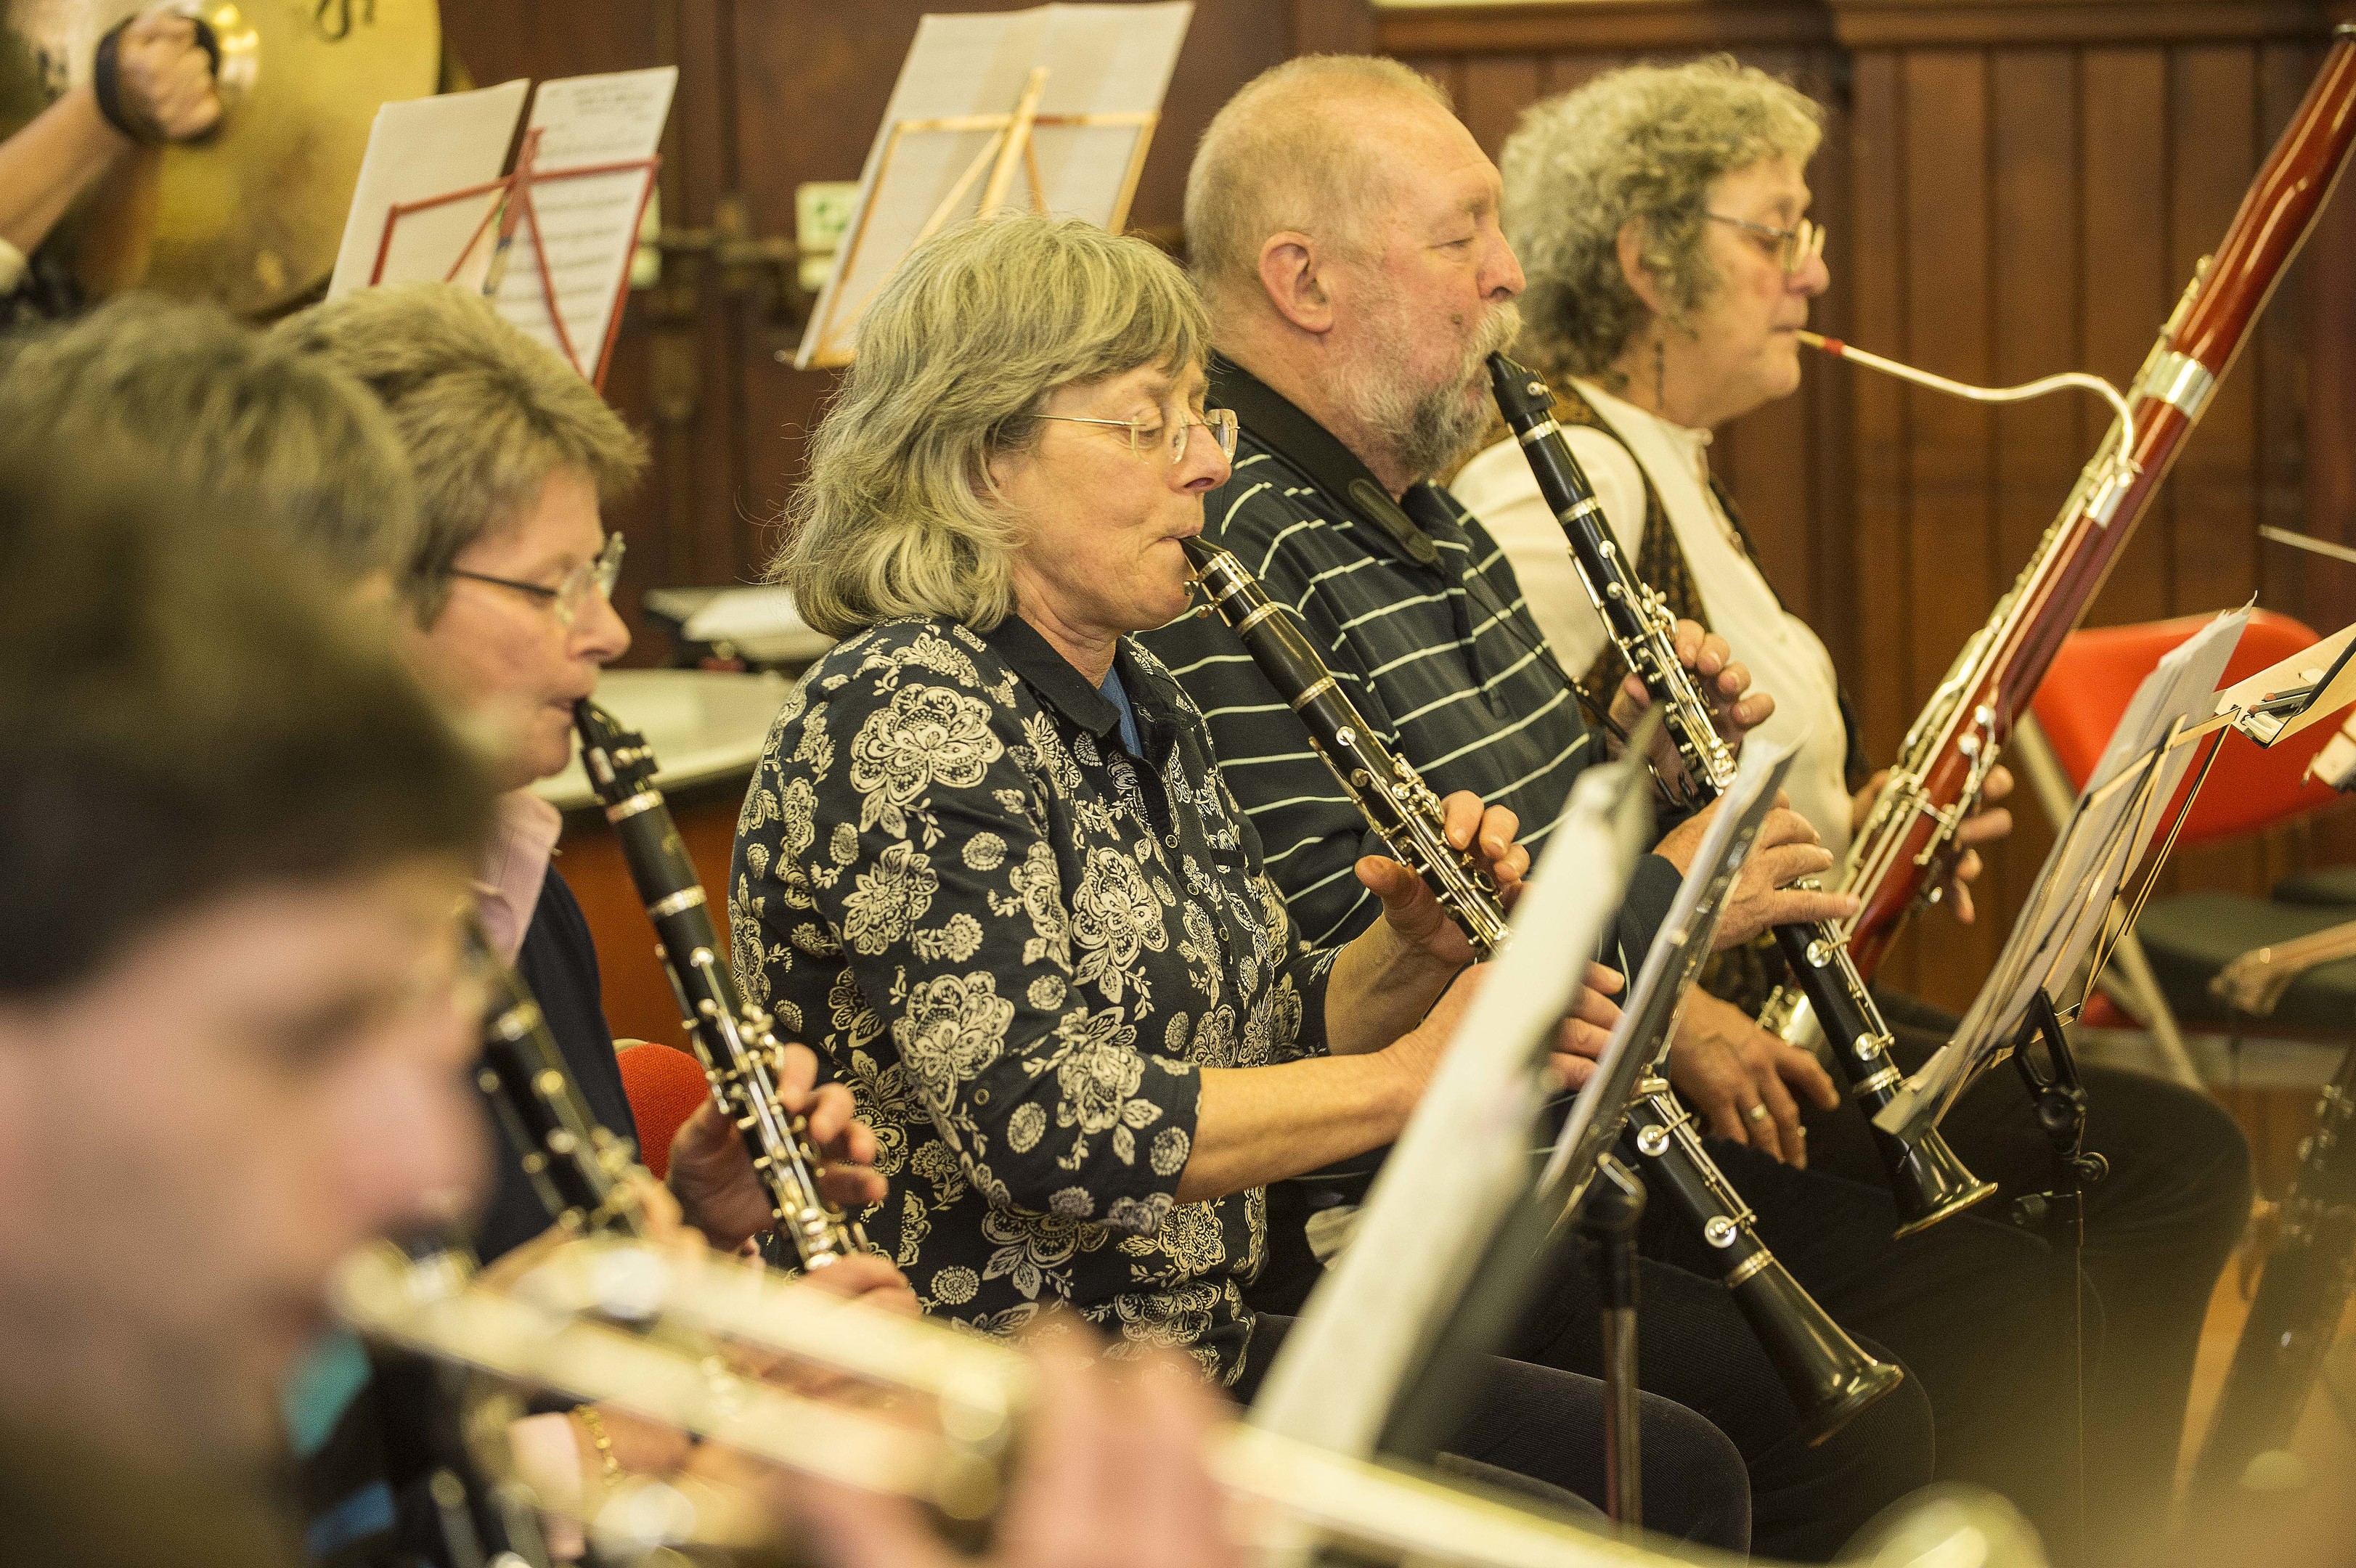 The inaugural 'Abirneithi Sinfonia' took place in the Nethy Bridge Community Centre